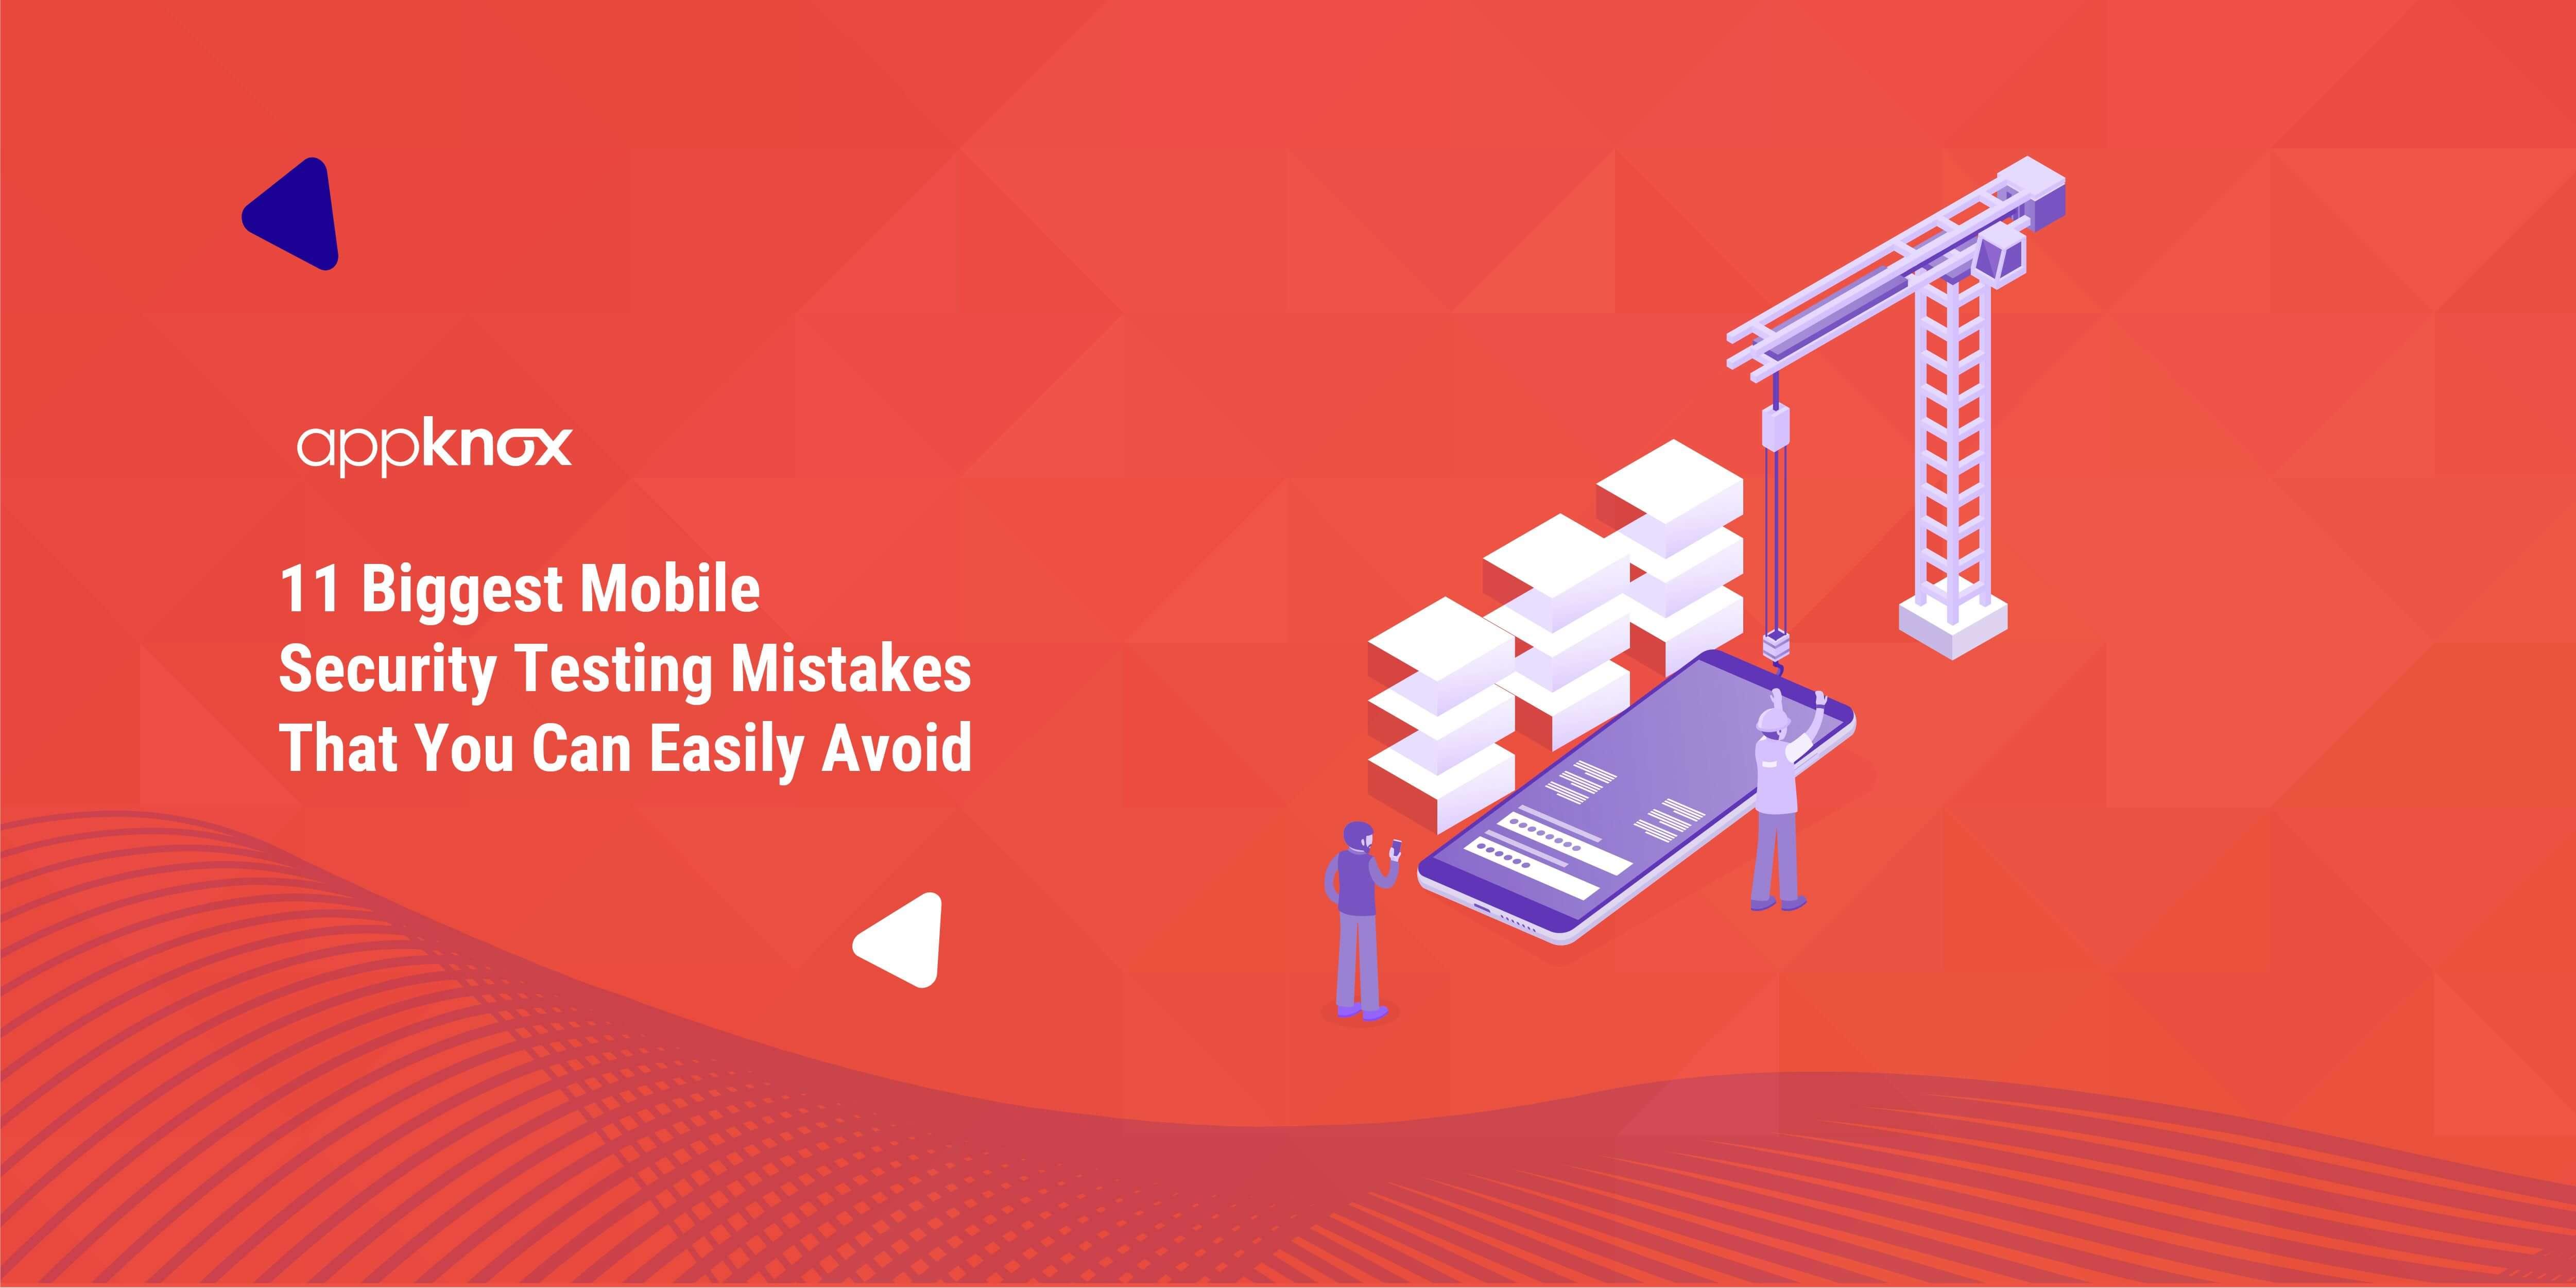 11 Biggest Mobile Security Testing Mistakes that You can Easily Avoid